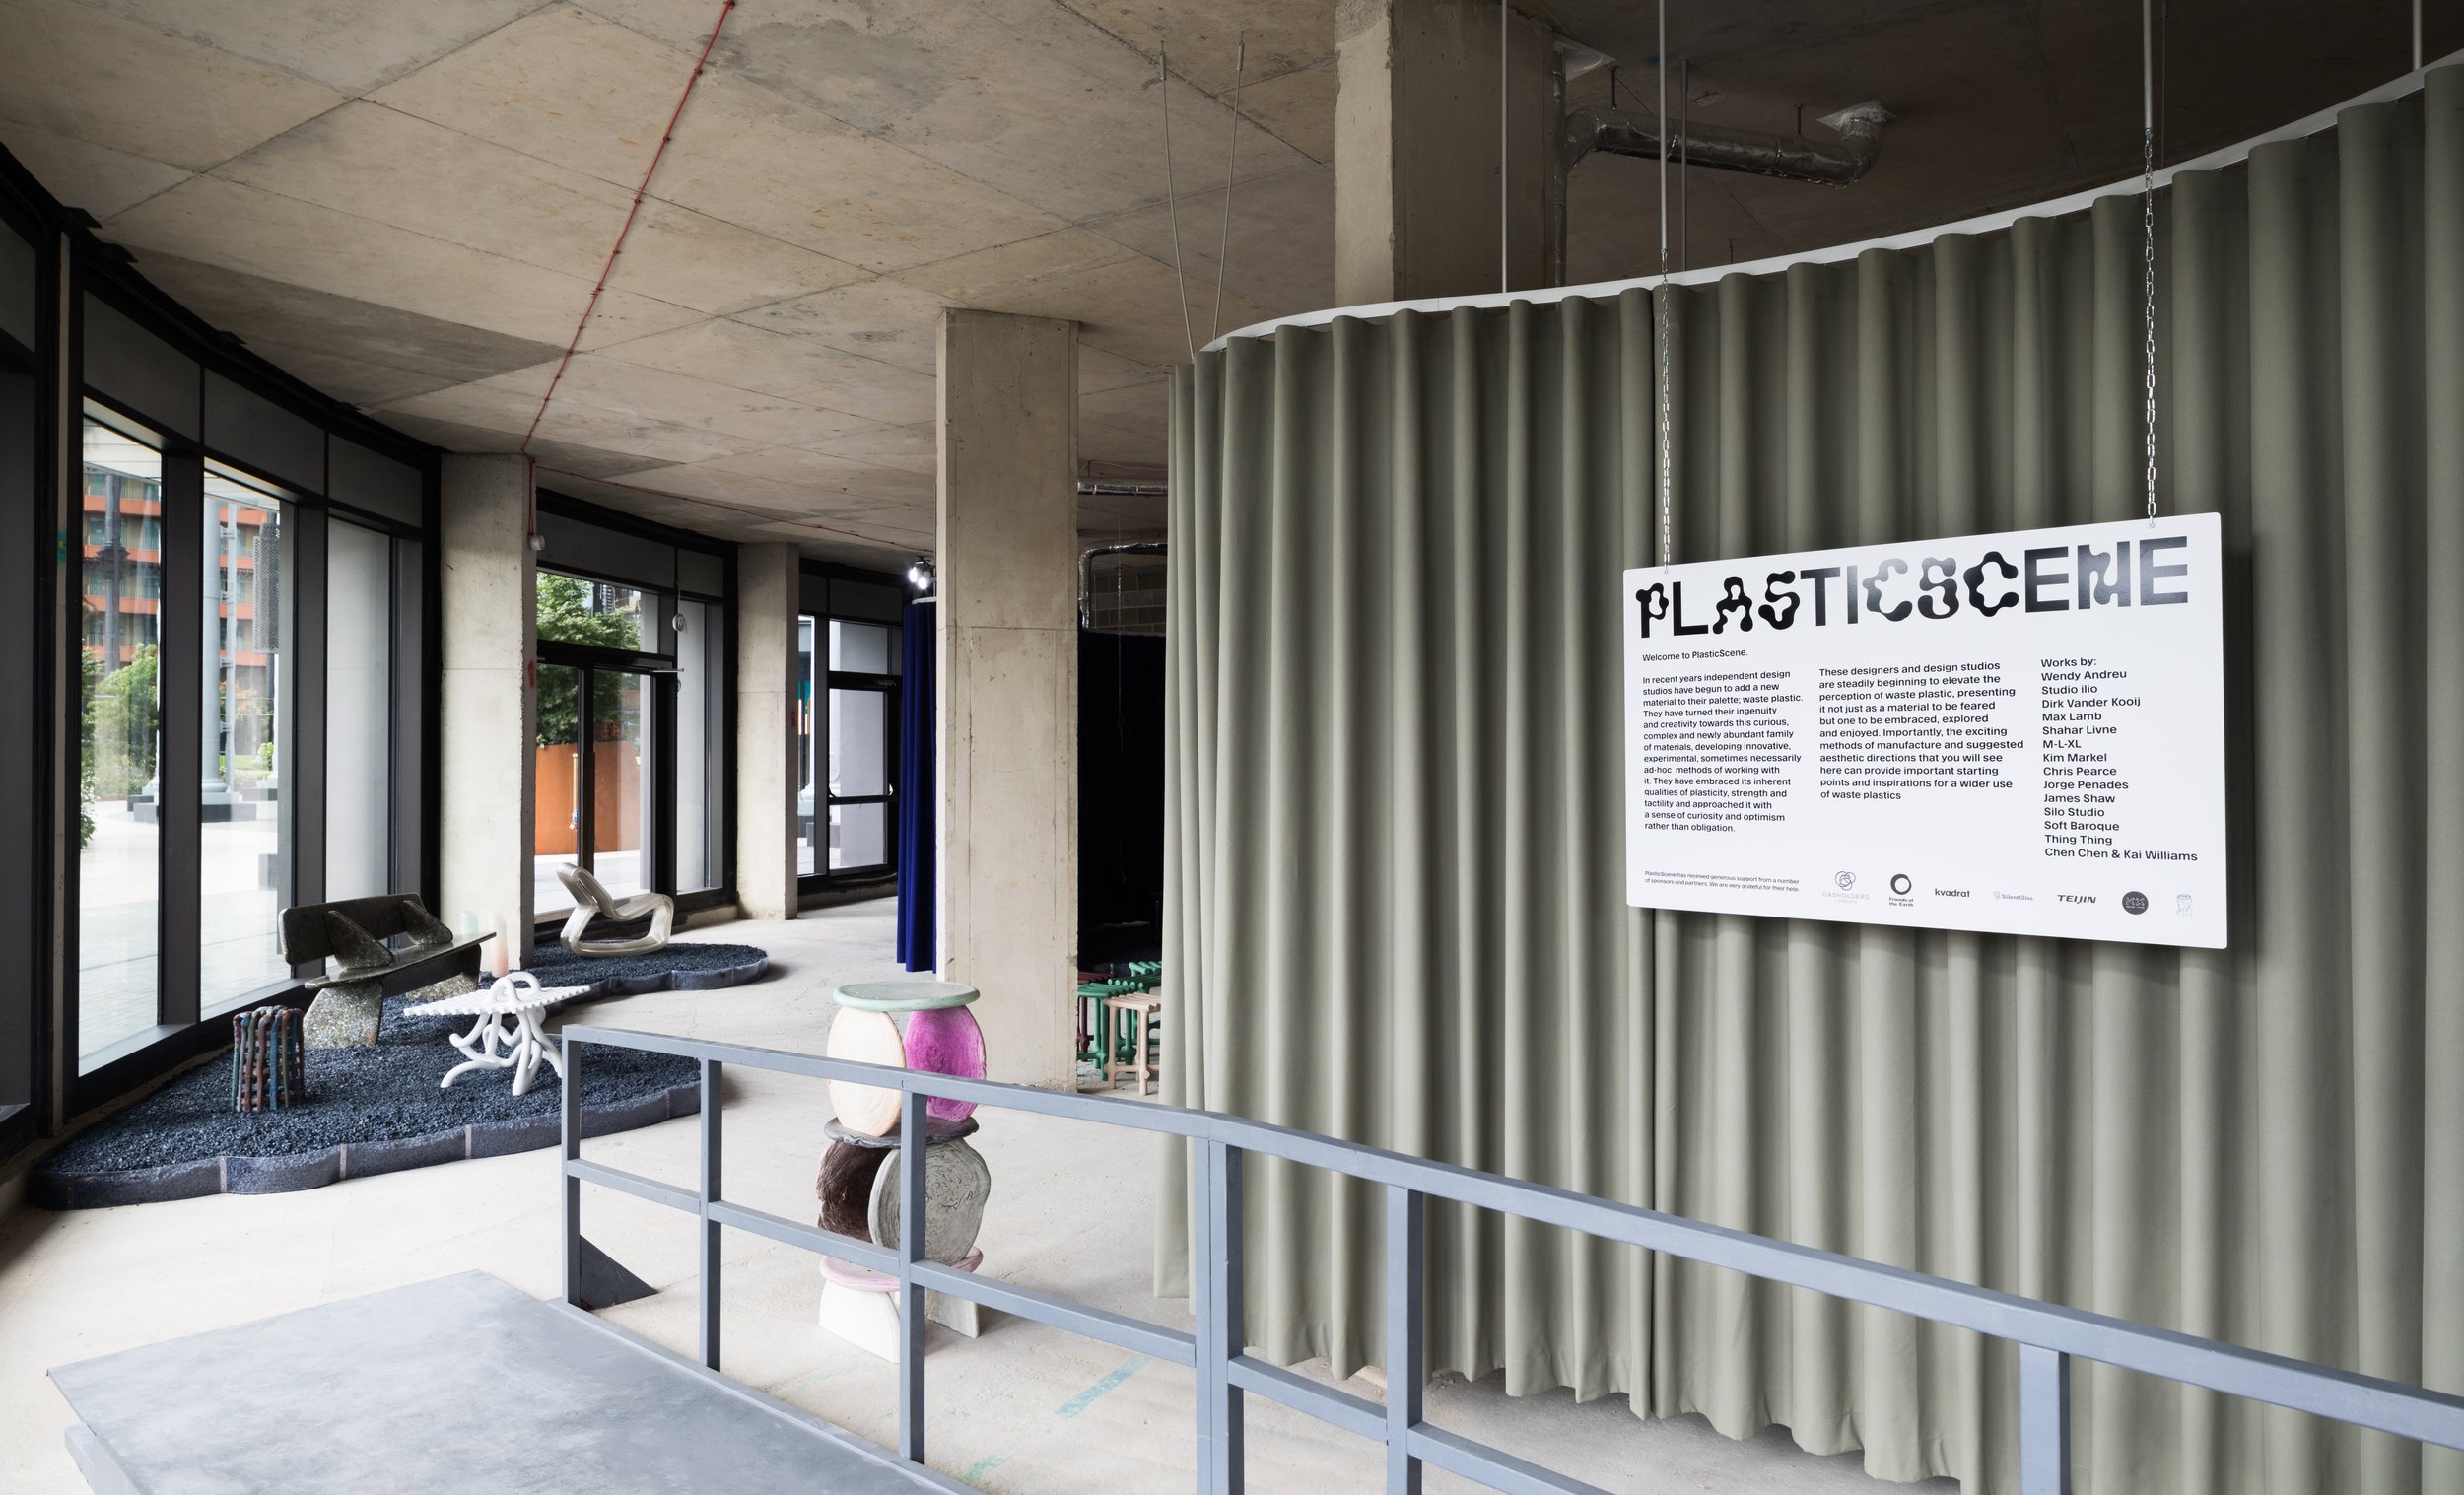 Plasticscene exhibition by Modern Design Review and James Shaw, enlivening an empty unit for London Design Festival.